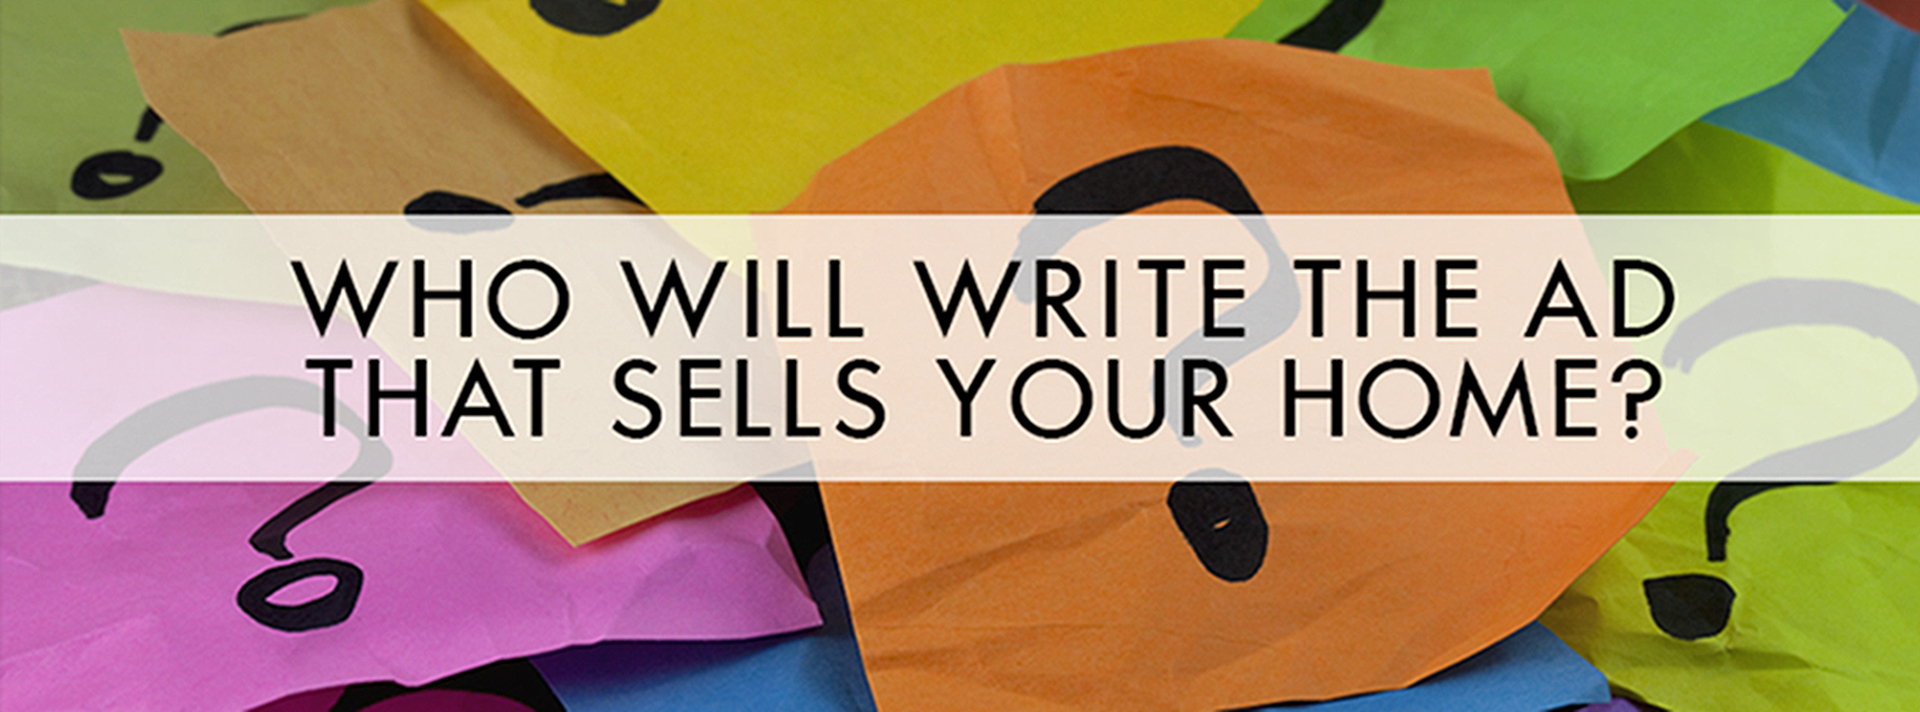 Who Will Write the Ad that Sells Your Home?